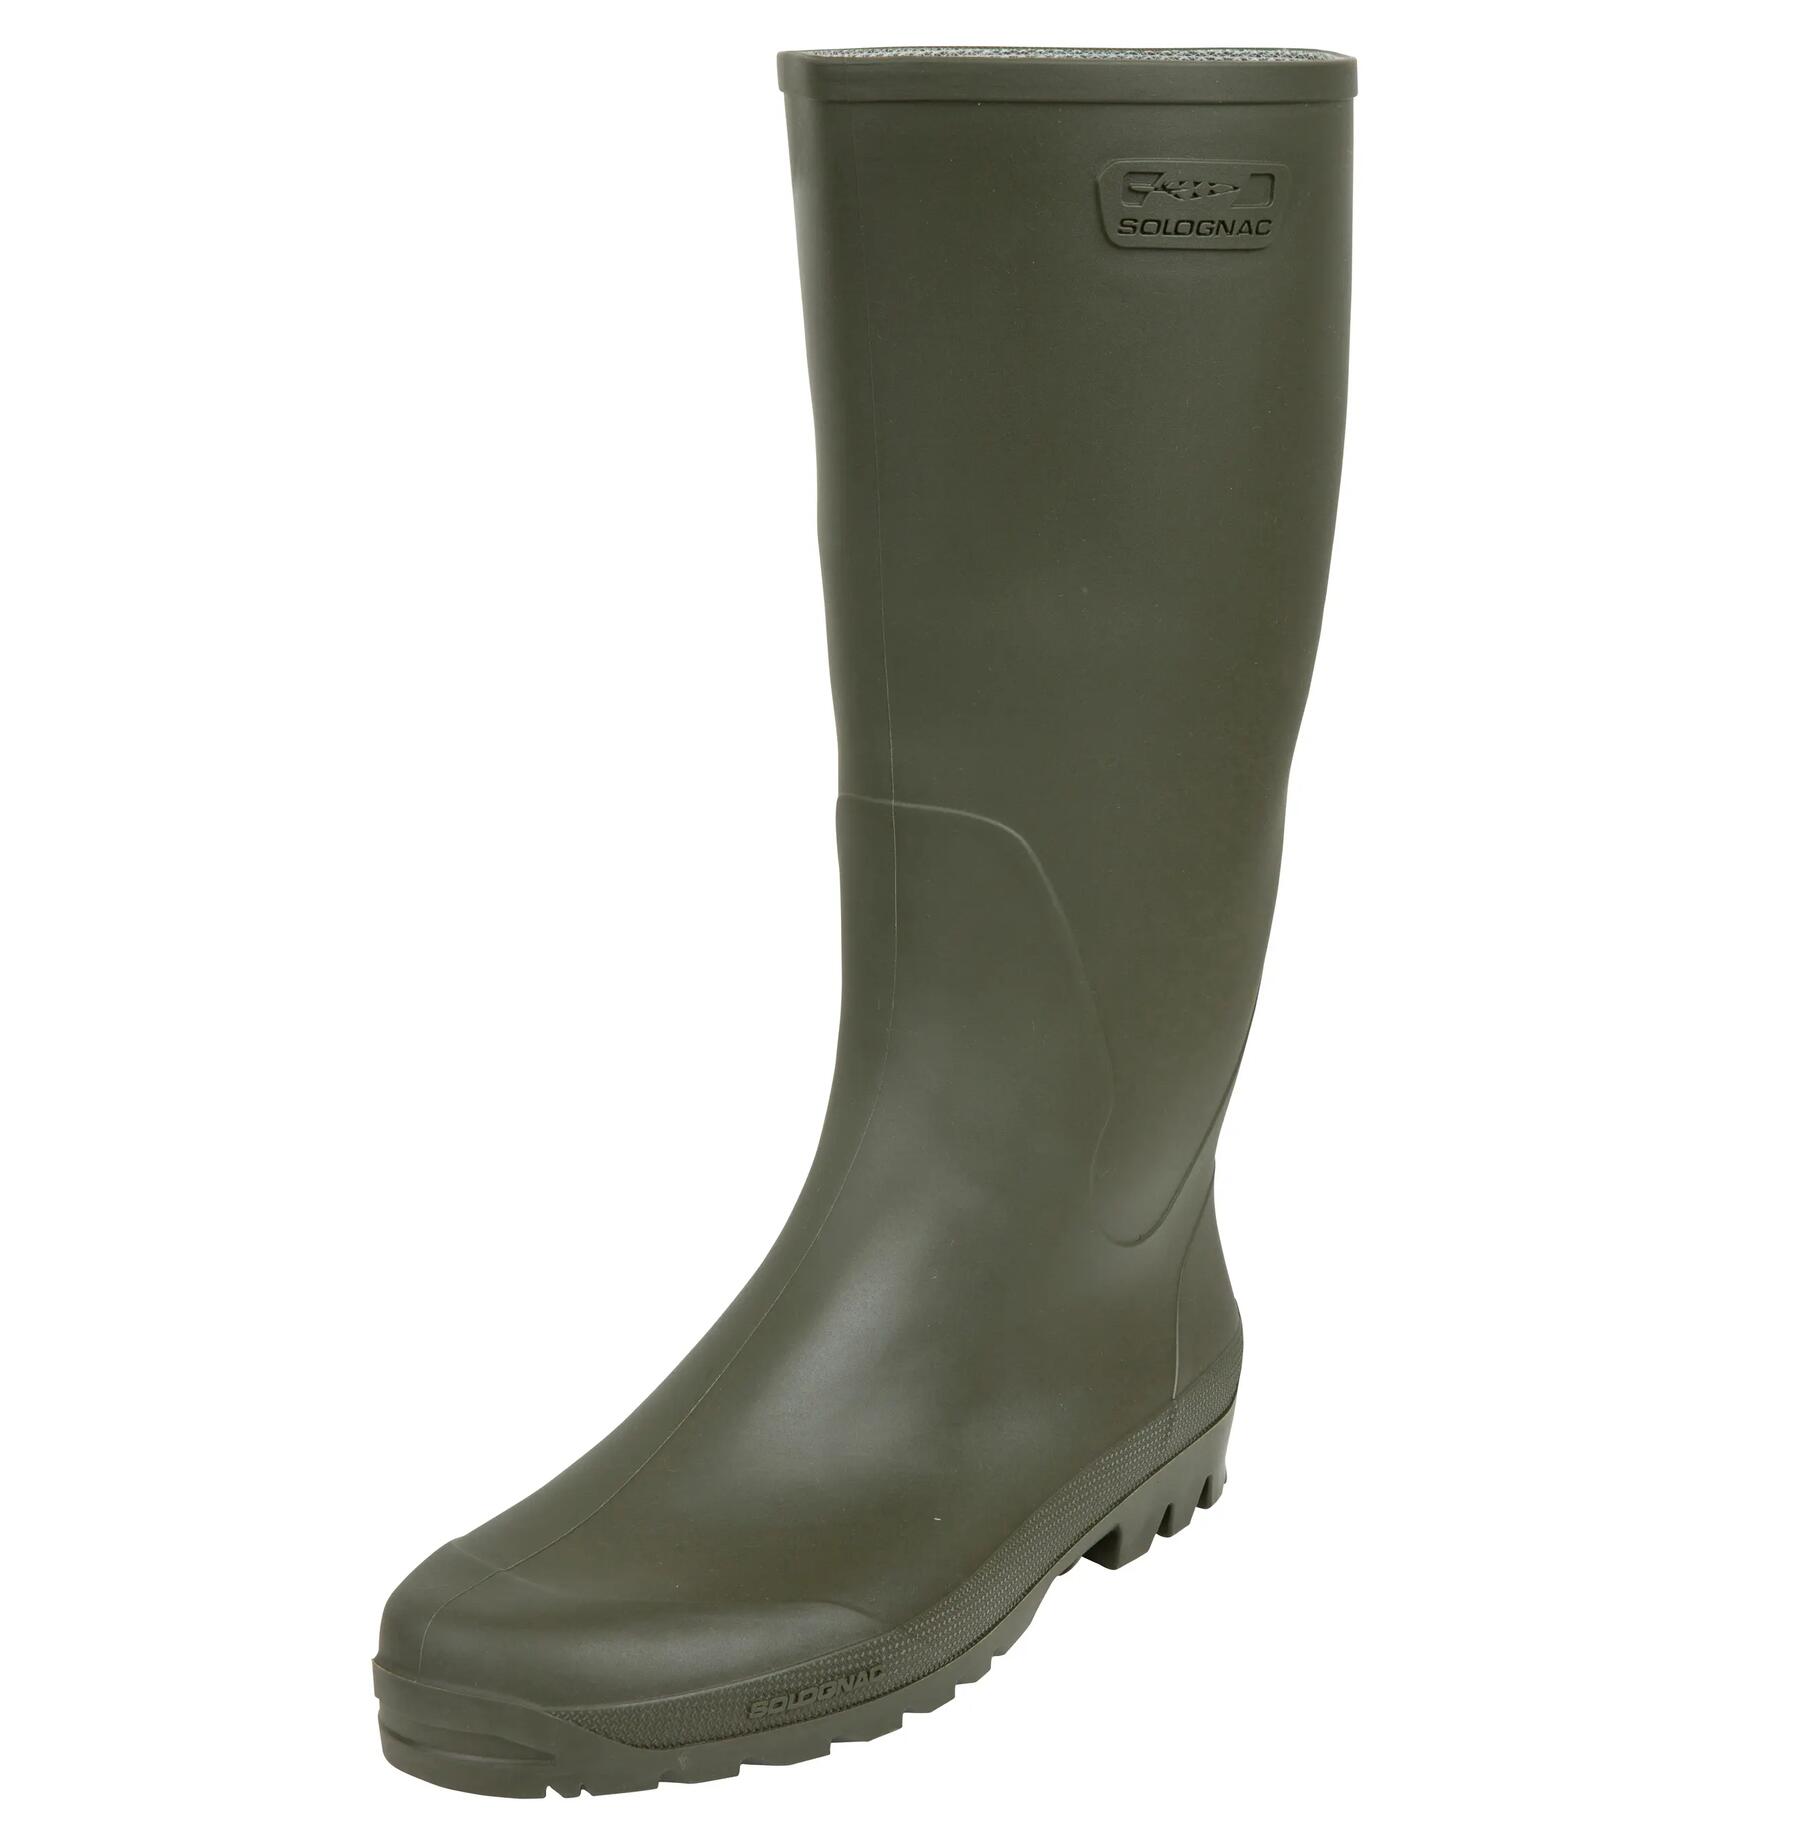 Which Wellies are best for walking?